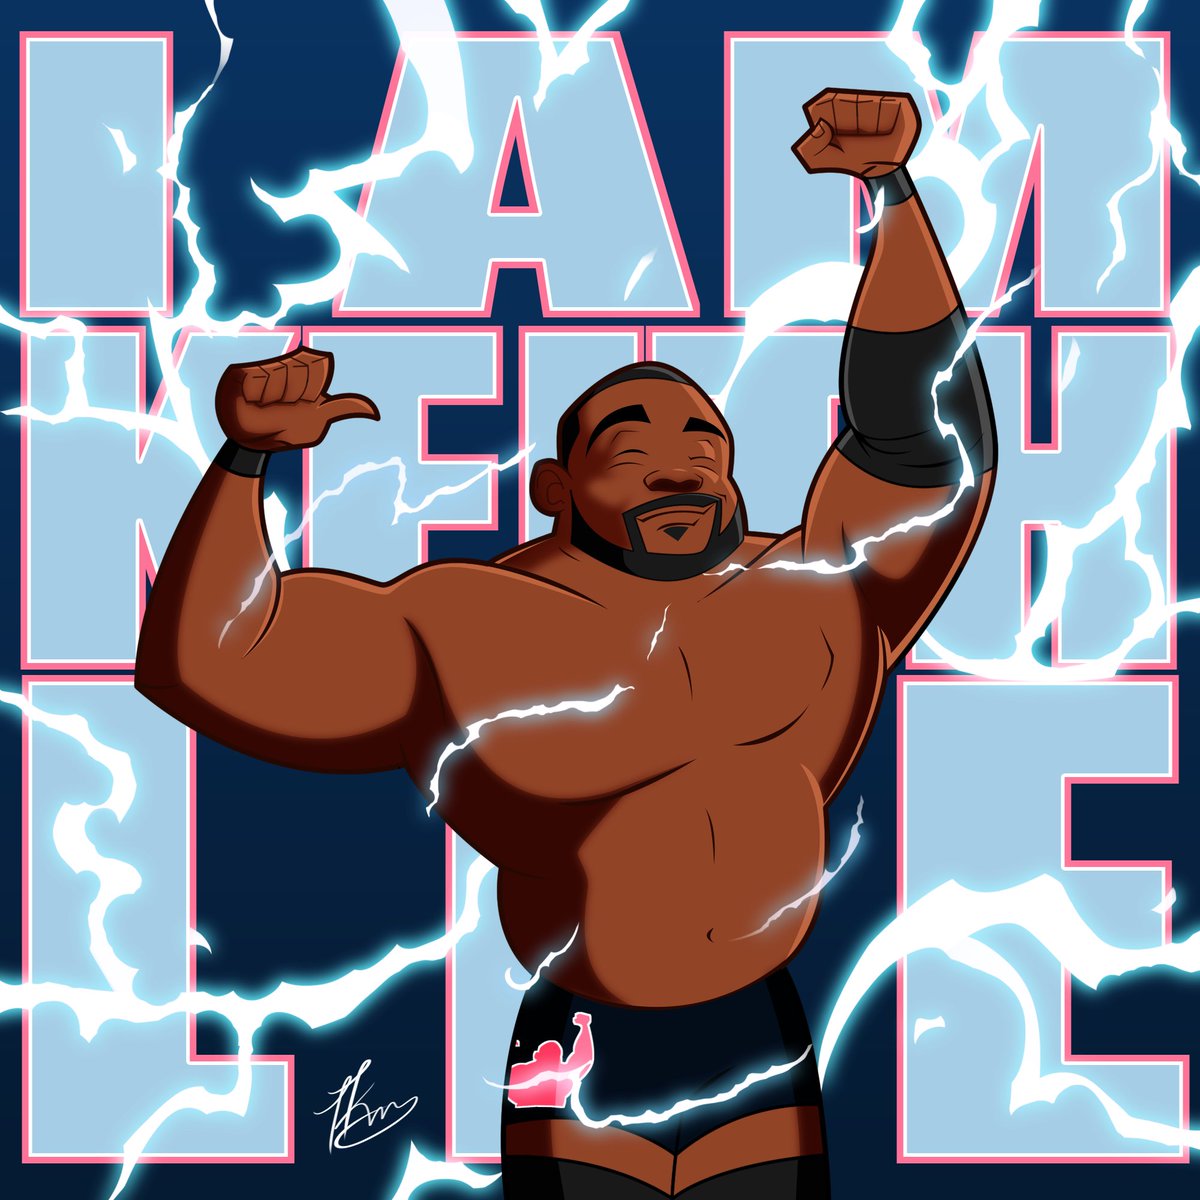 BASK in this @RealKeithLee piece
I put together 

@AEW